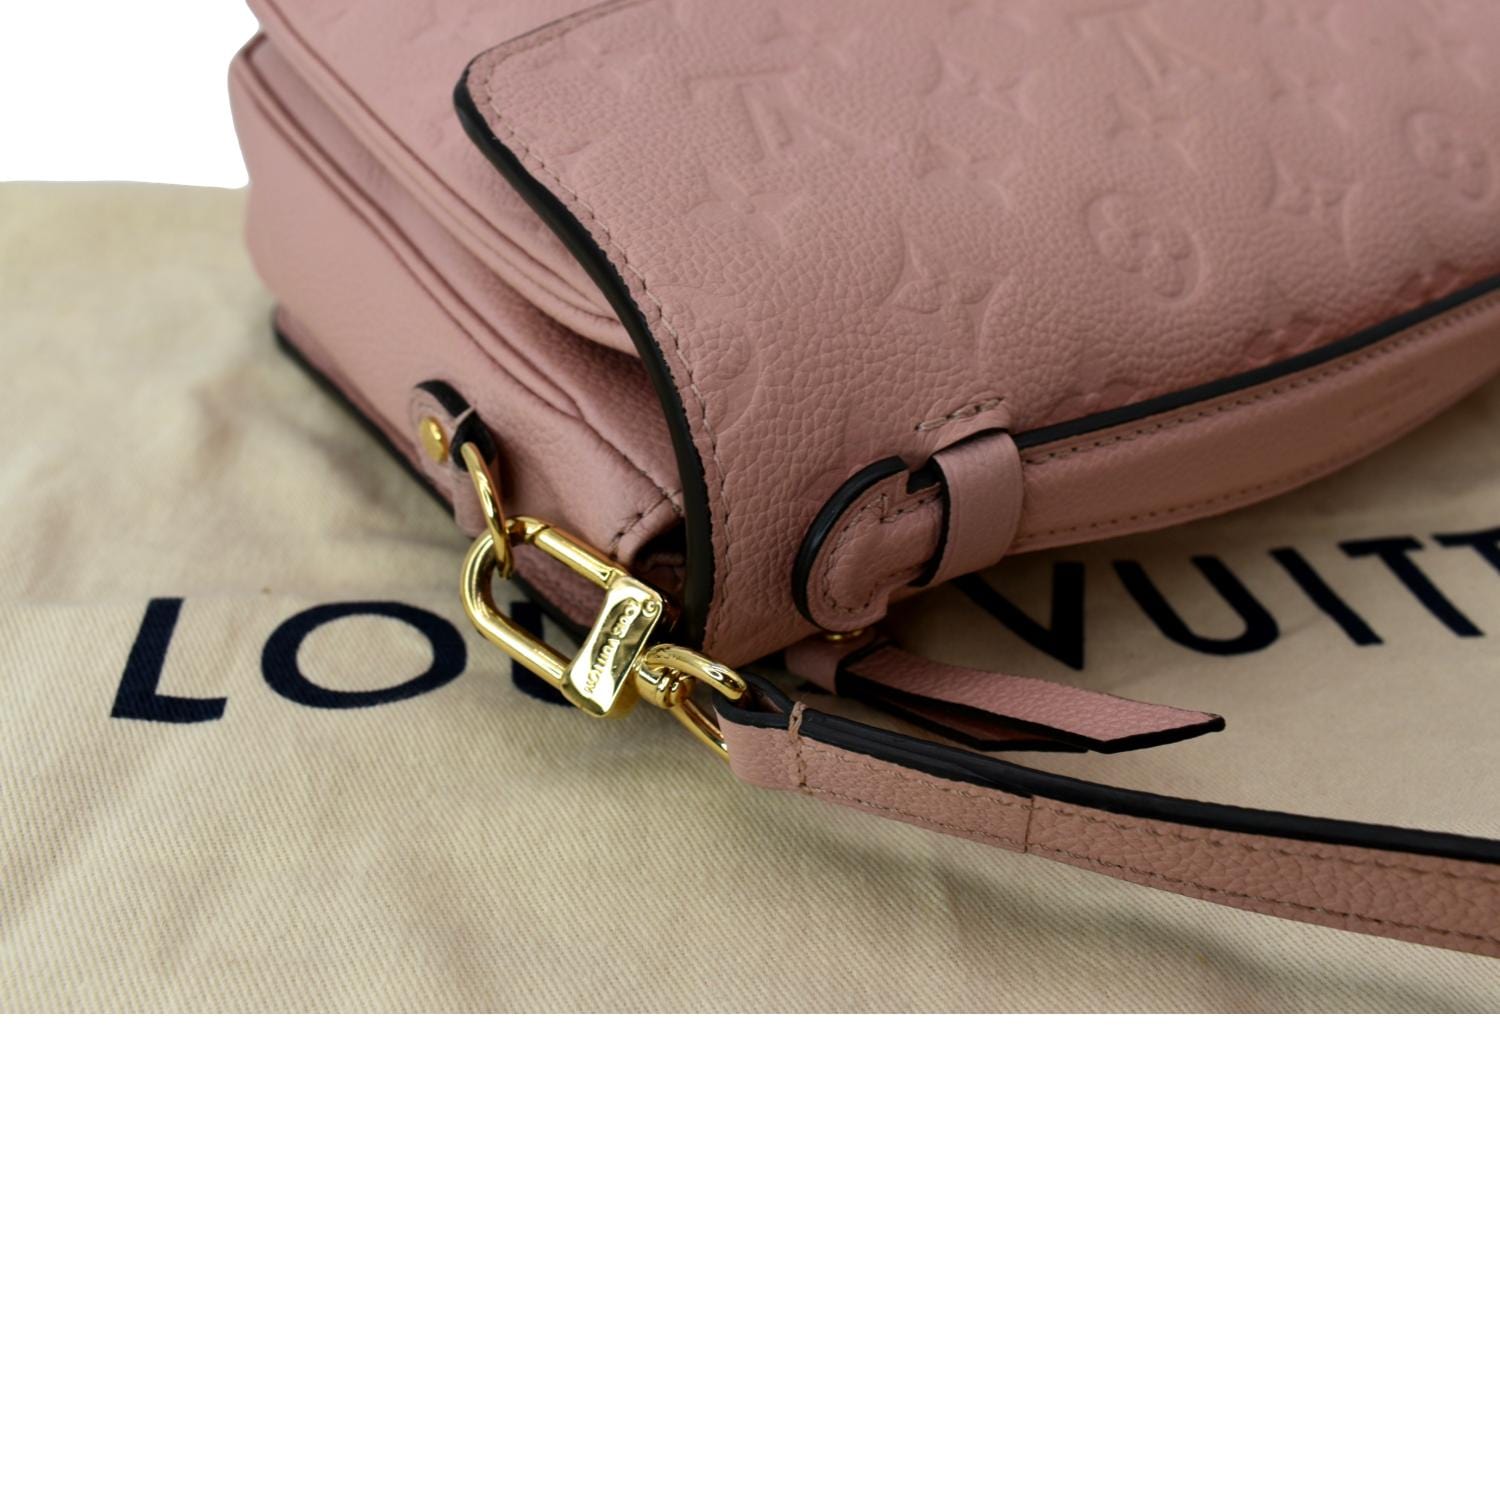 Louis Vuitton Cosmetic Pouch in Berry